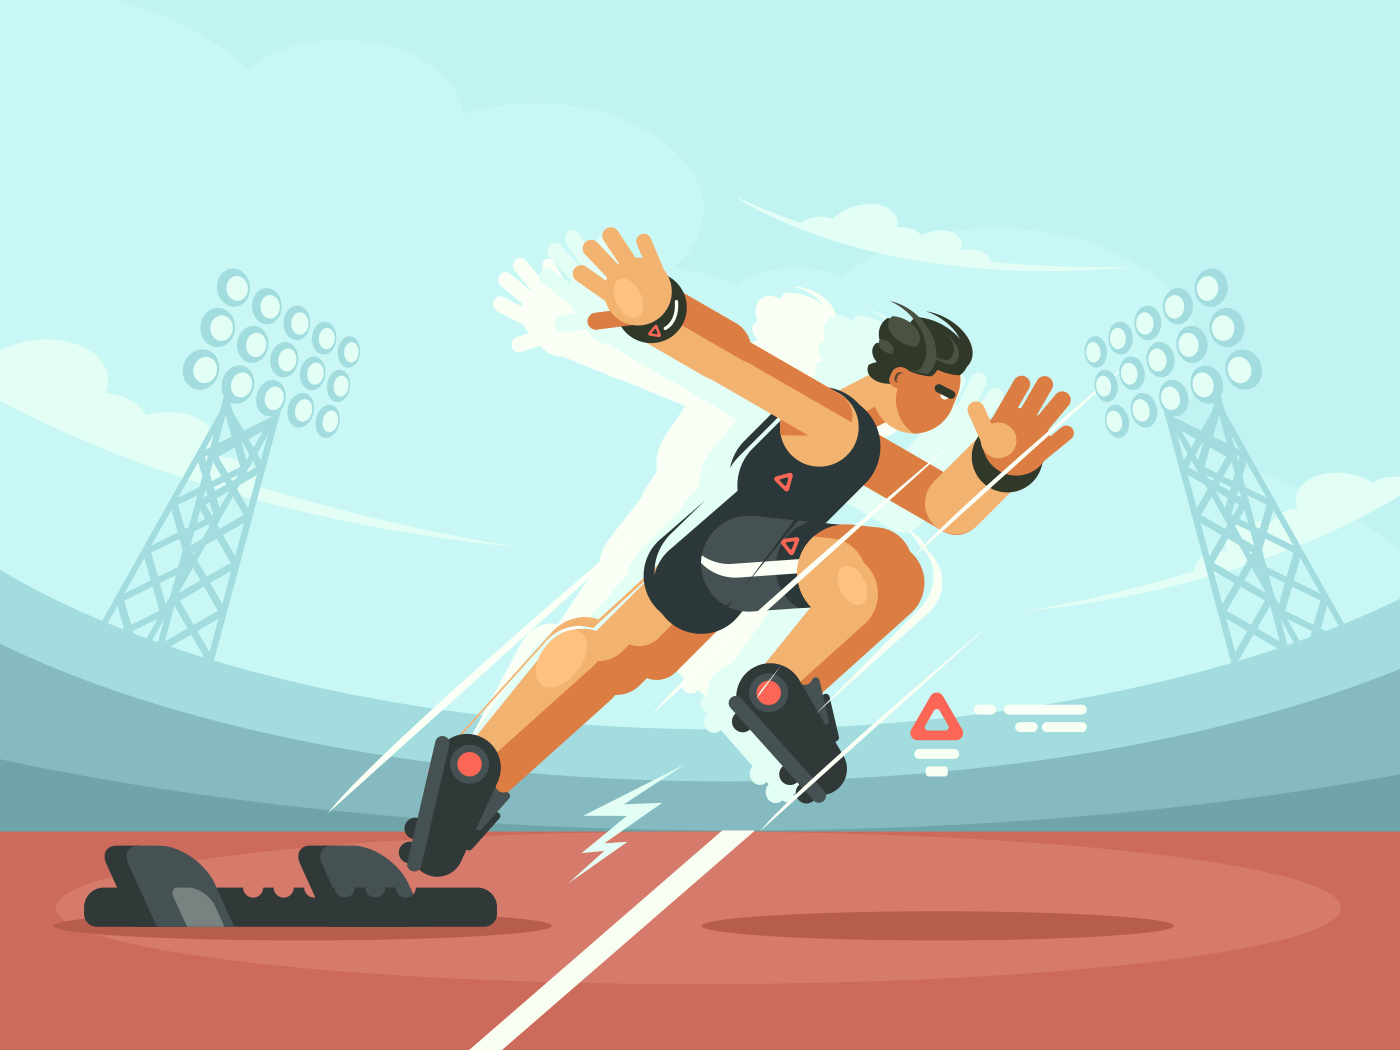 Athlete sprint start from pads to compete run. Vector illustration